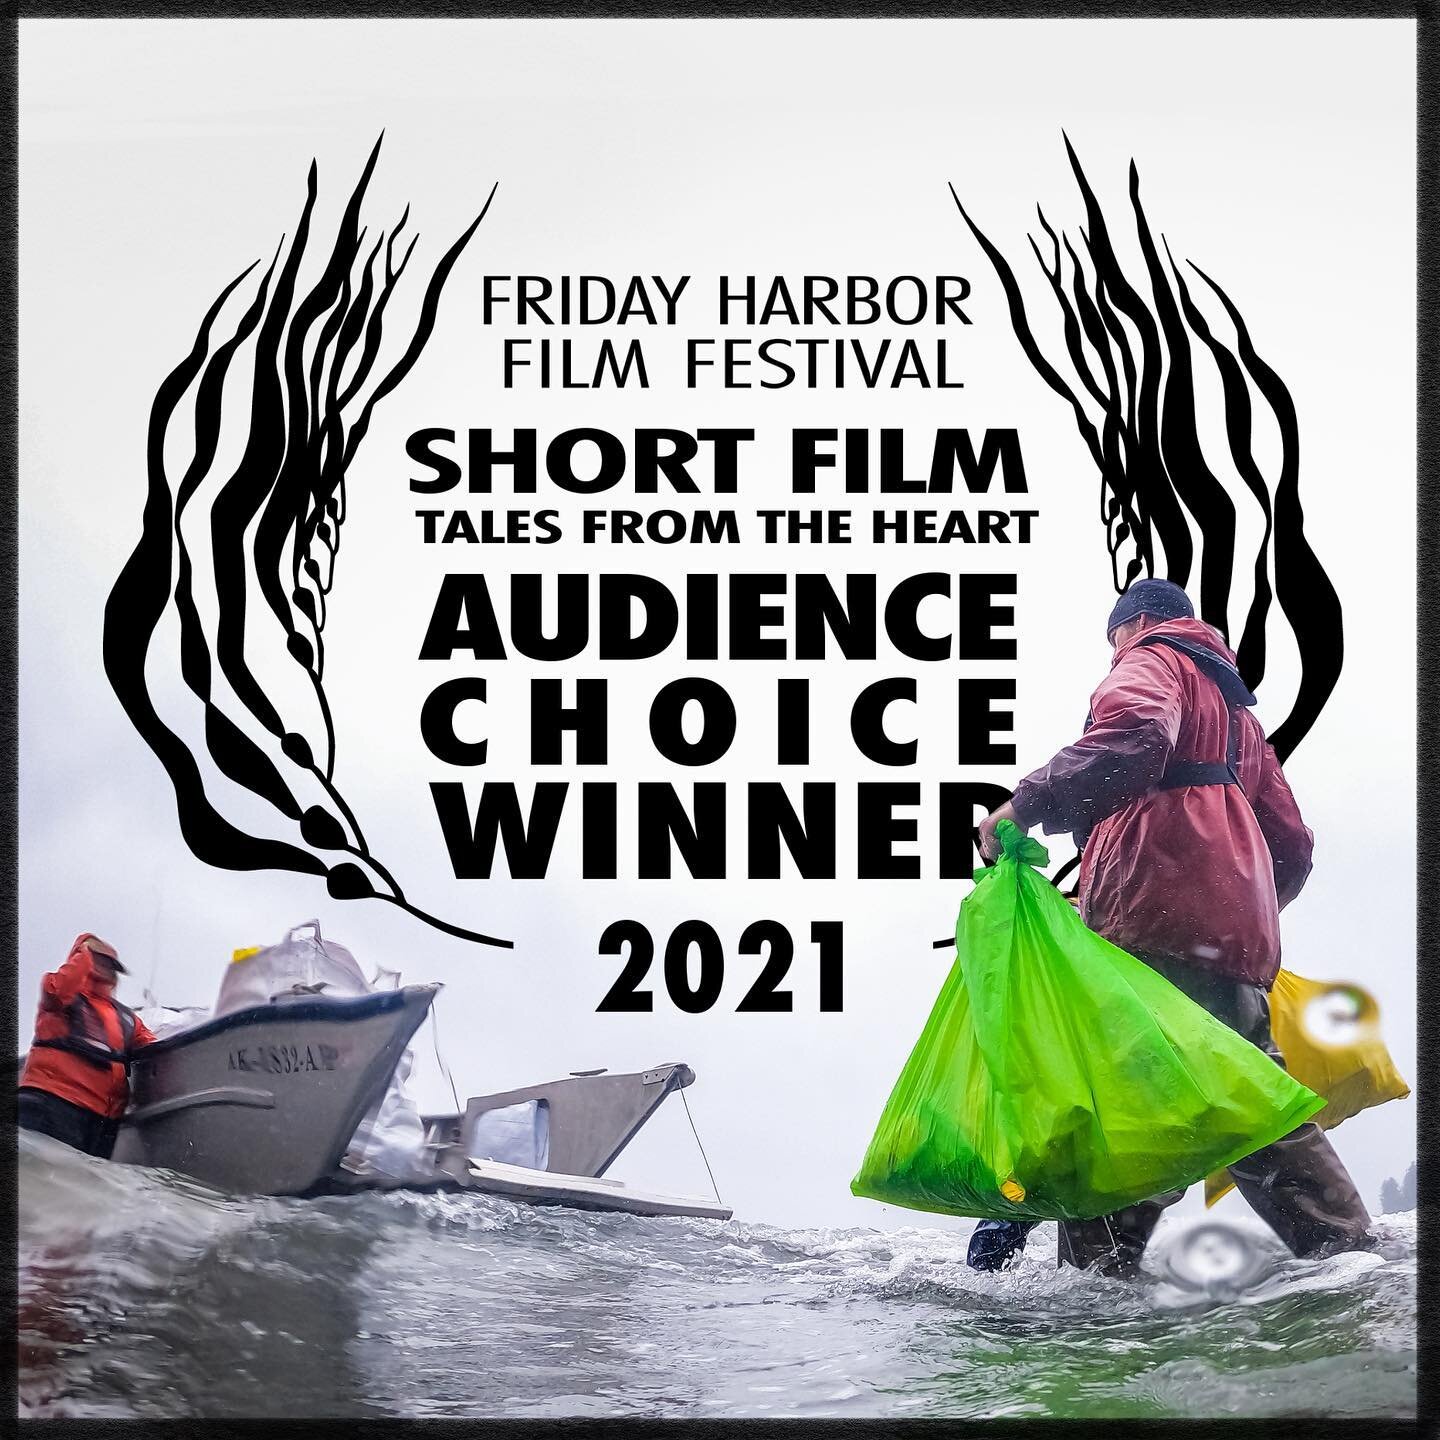 Honored to receive the Tales from the Heart award from the @fridayharborfilm festival for If You Give a Beach a Bottle. Marine debris is still a largely invisible problem for most people and a short film is just one small way to bring awareness to th